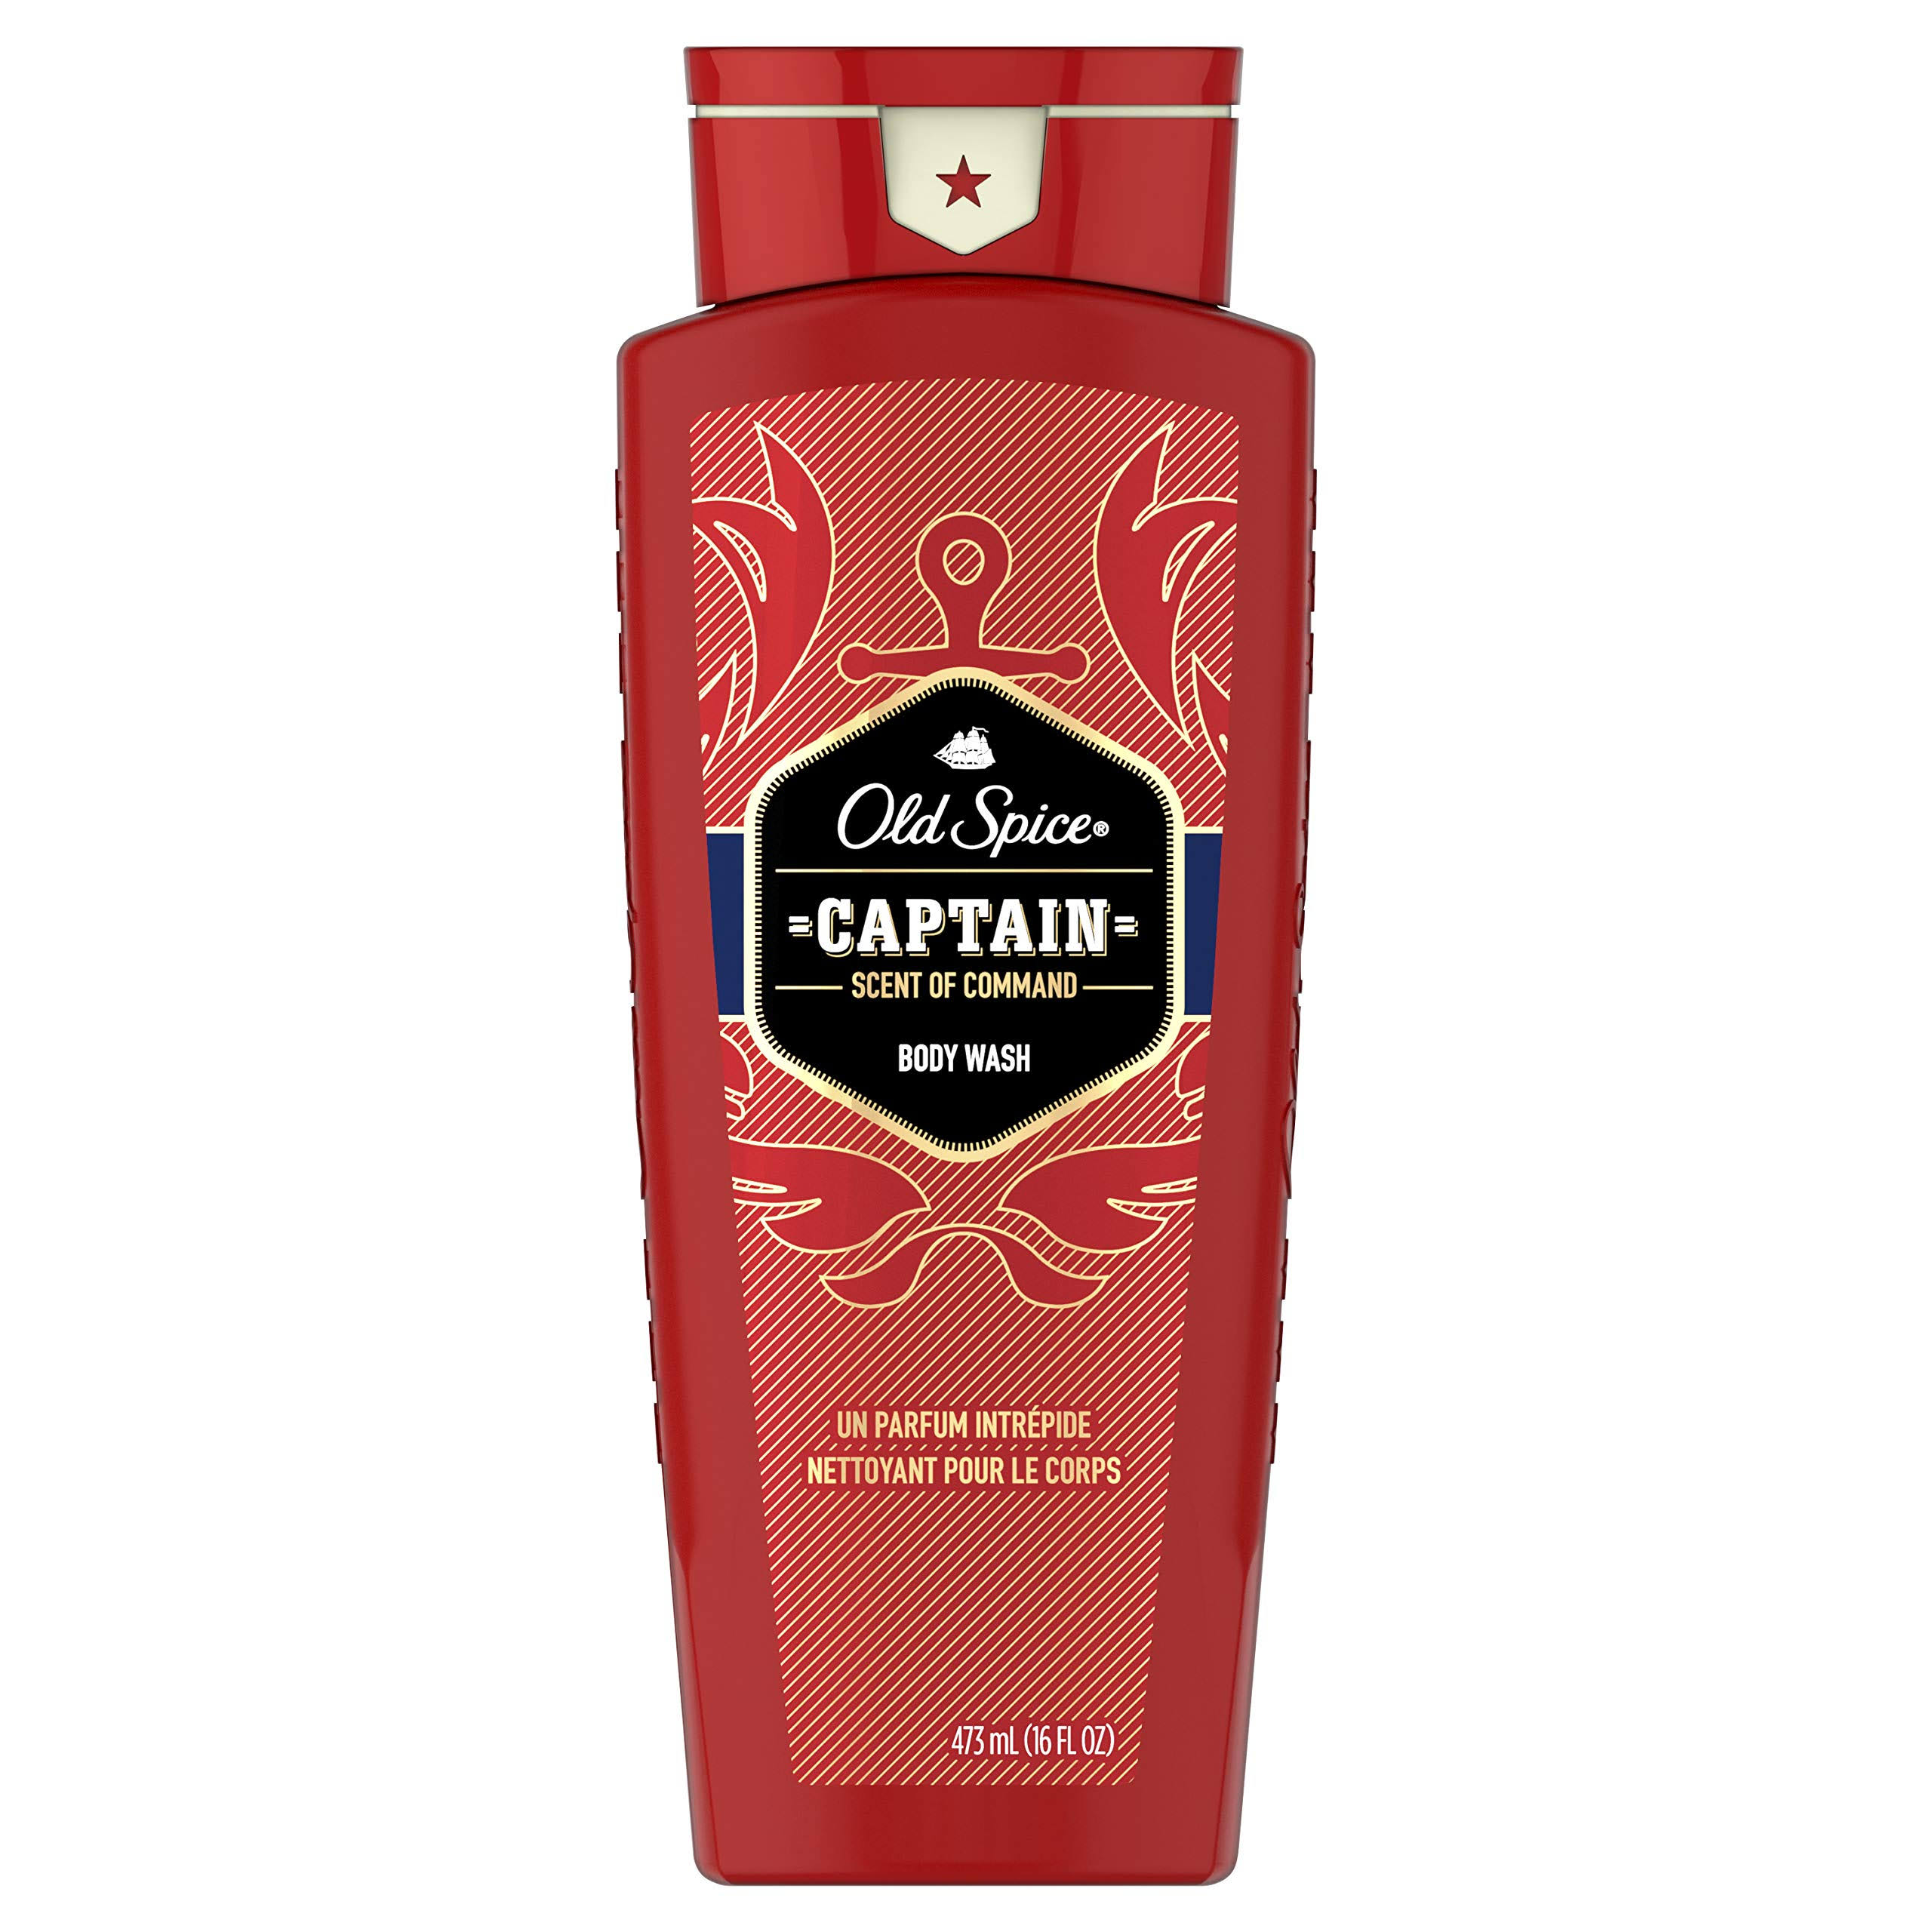 Old Spice Men's Red Collection Scent Body Wash - Captain, 16oz